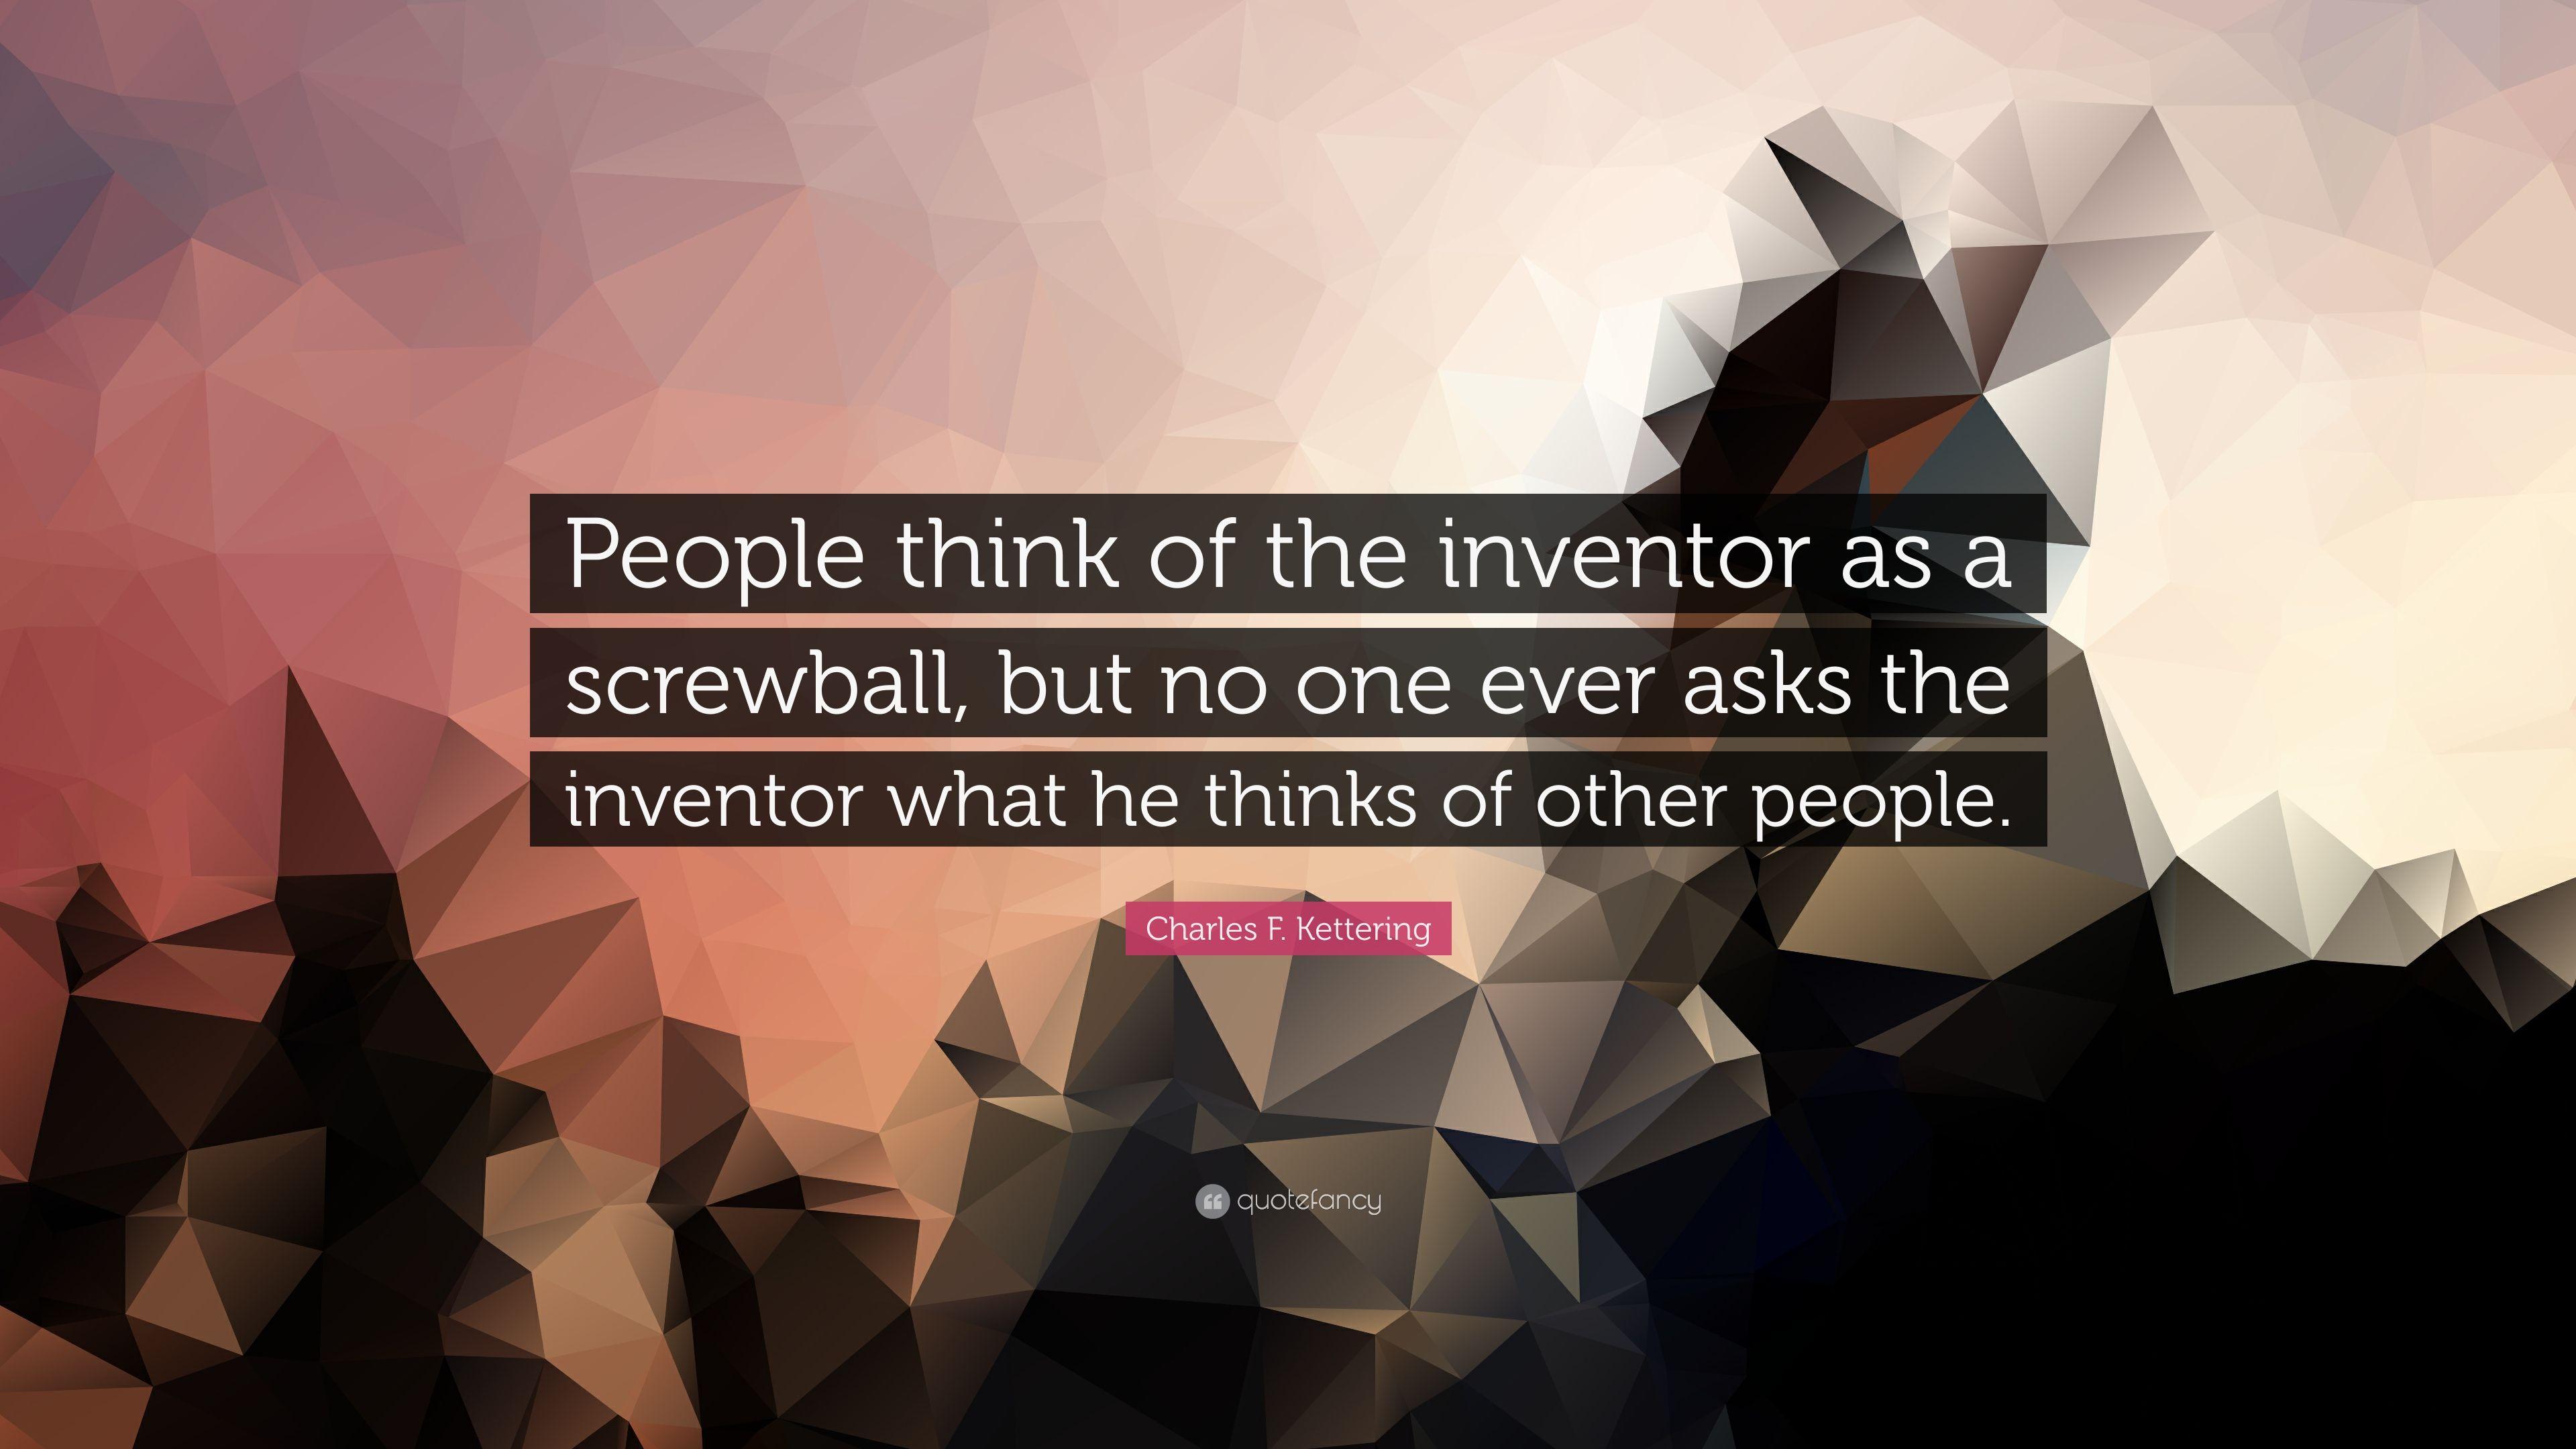 Charles F. Kettering Quote: “People think of the inventor as a